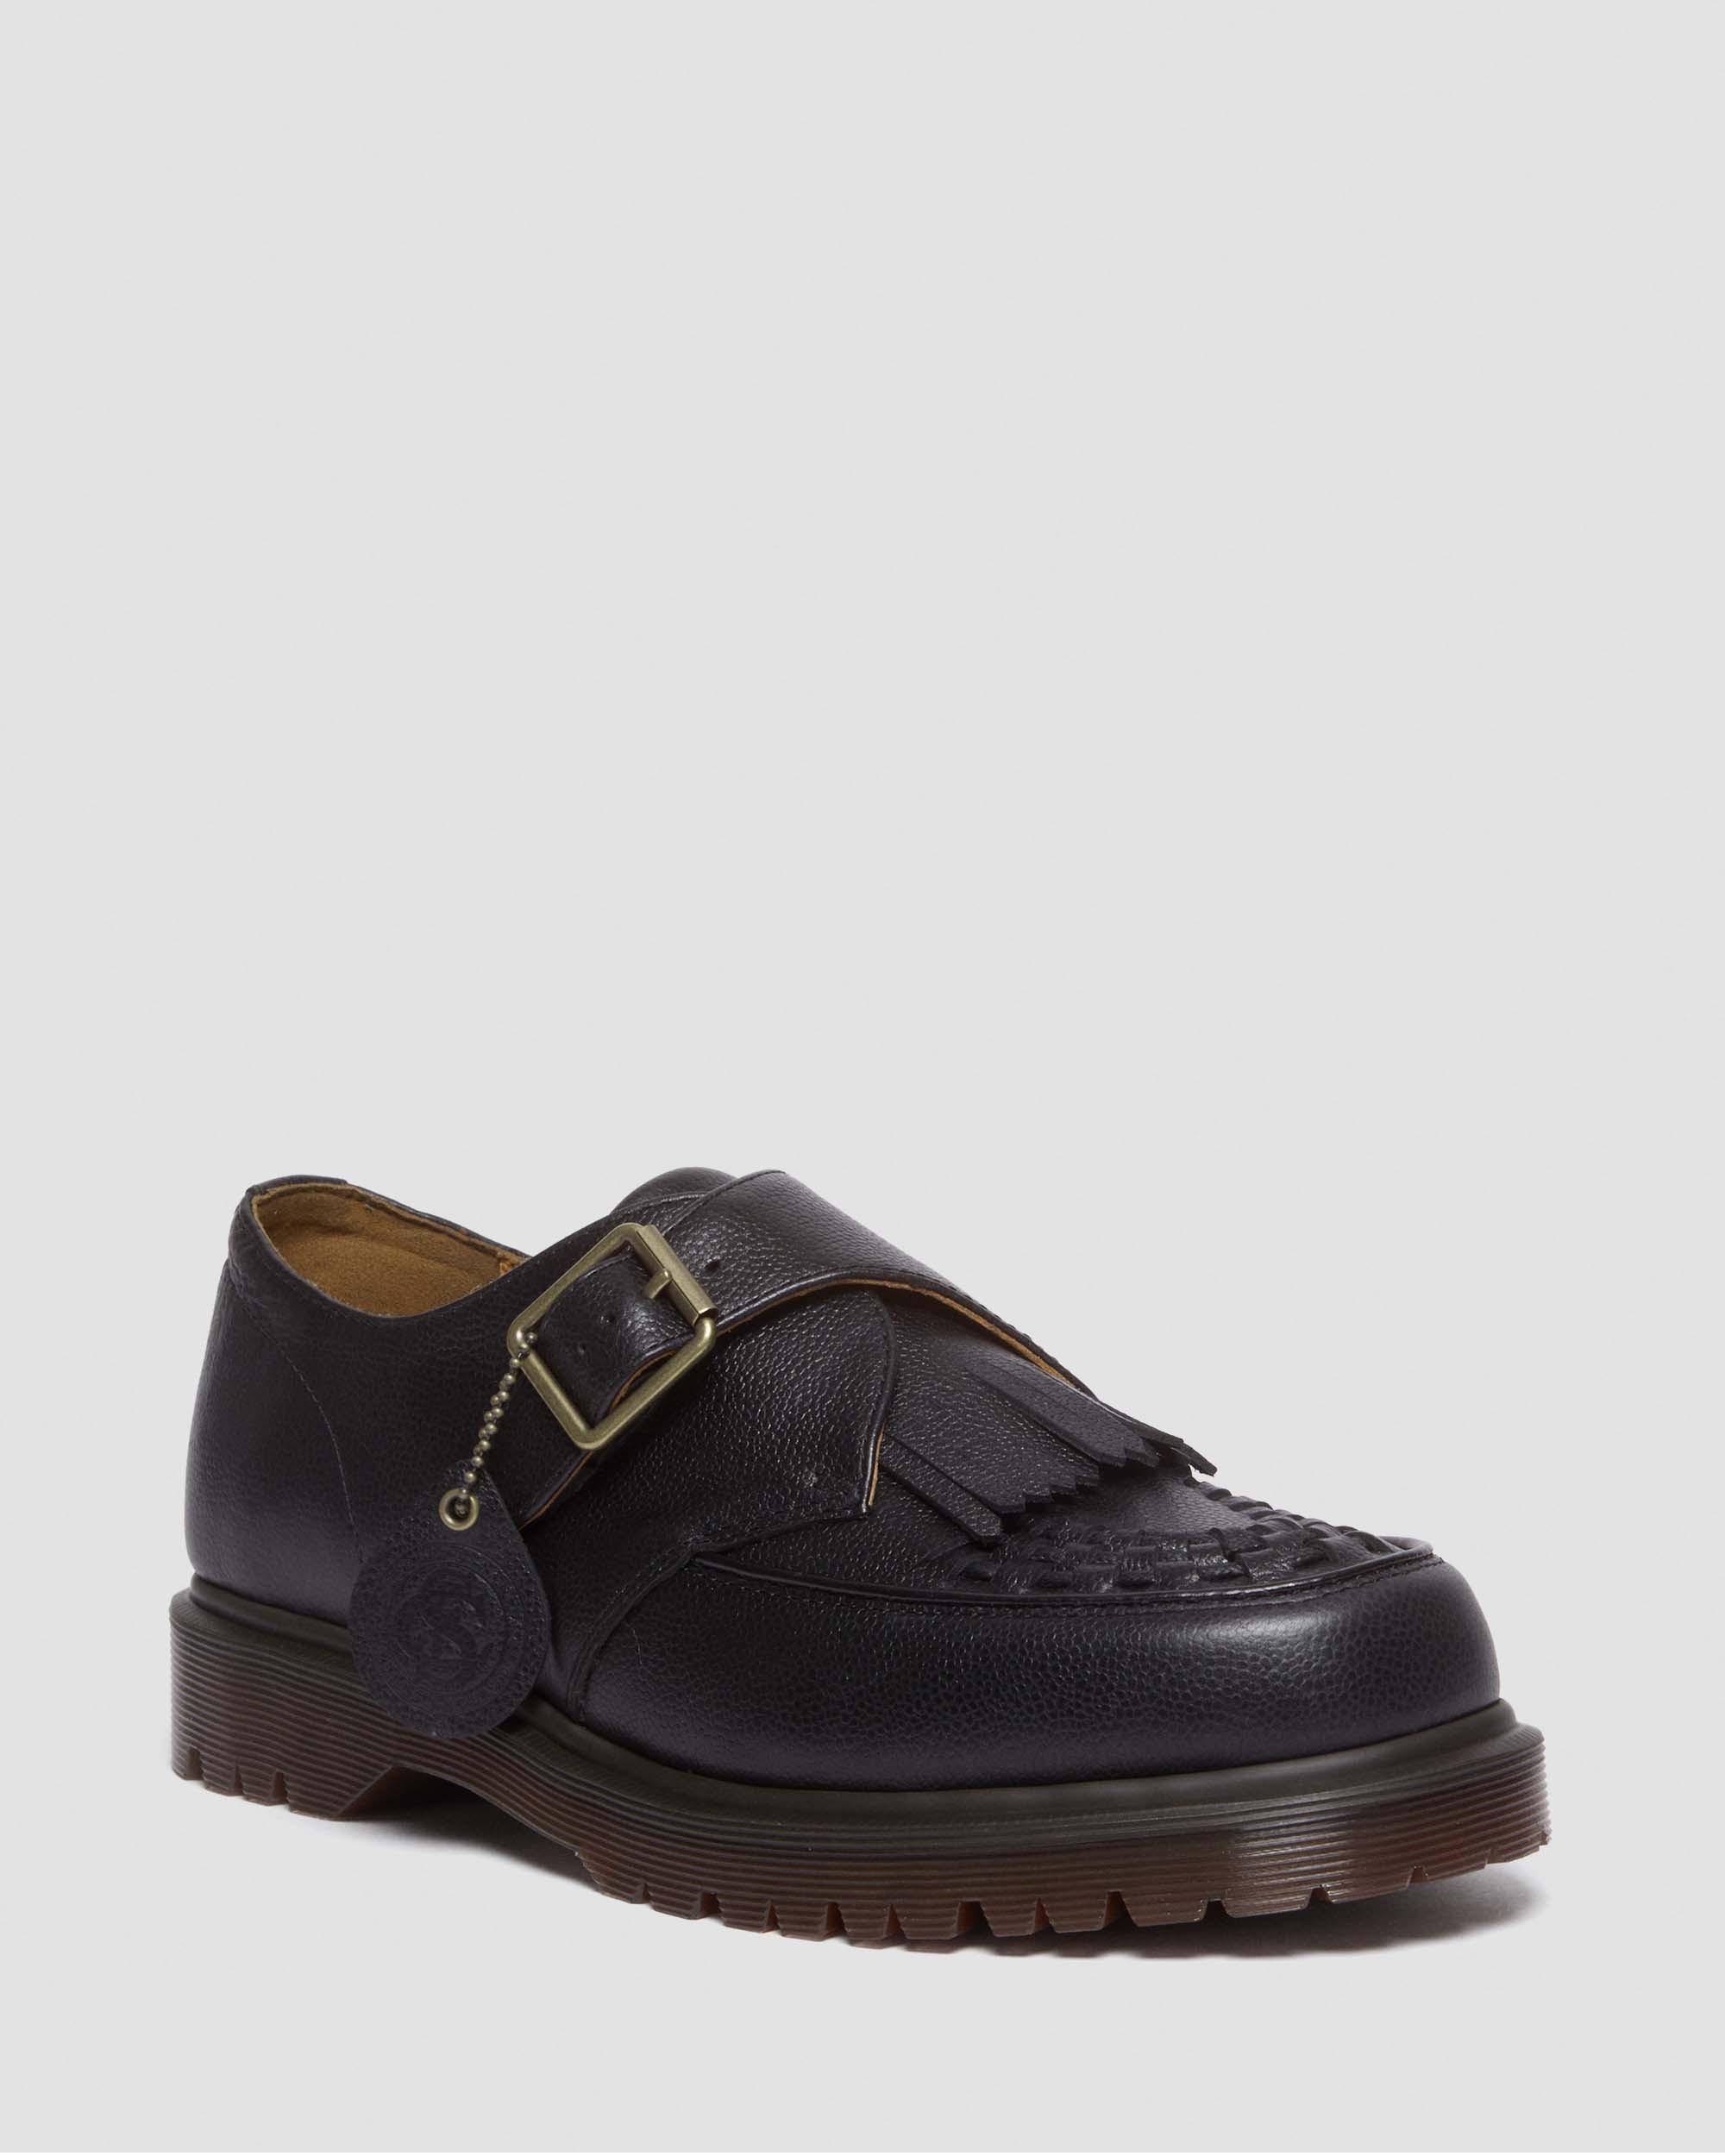 Ramsey Westminster Leather Buckle Creepers